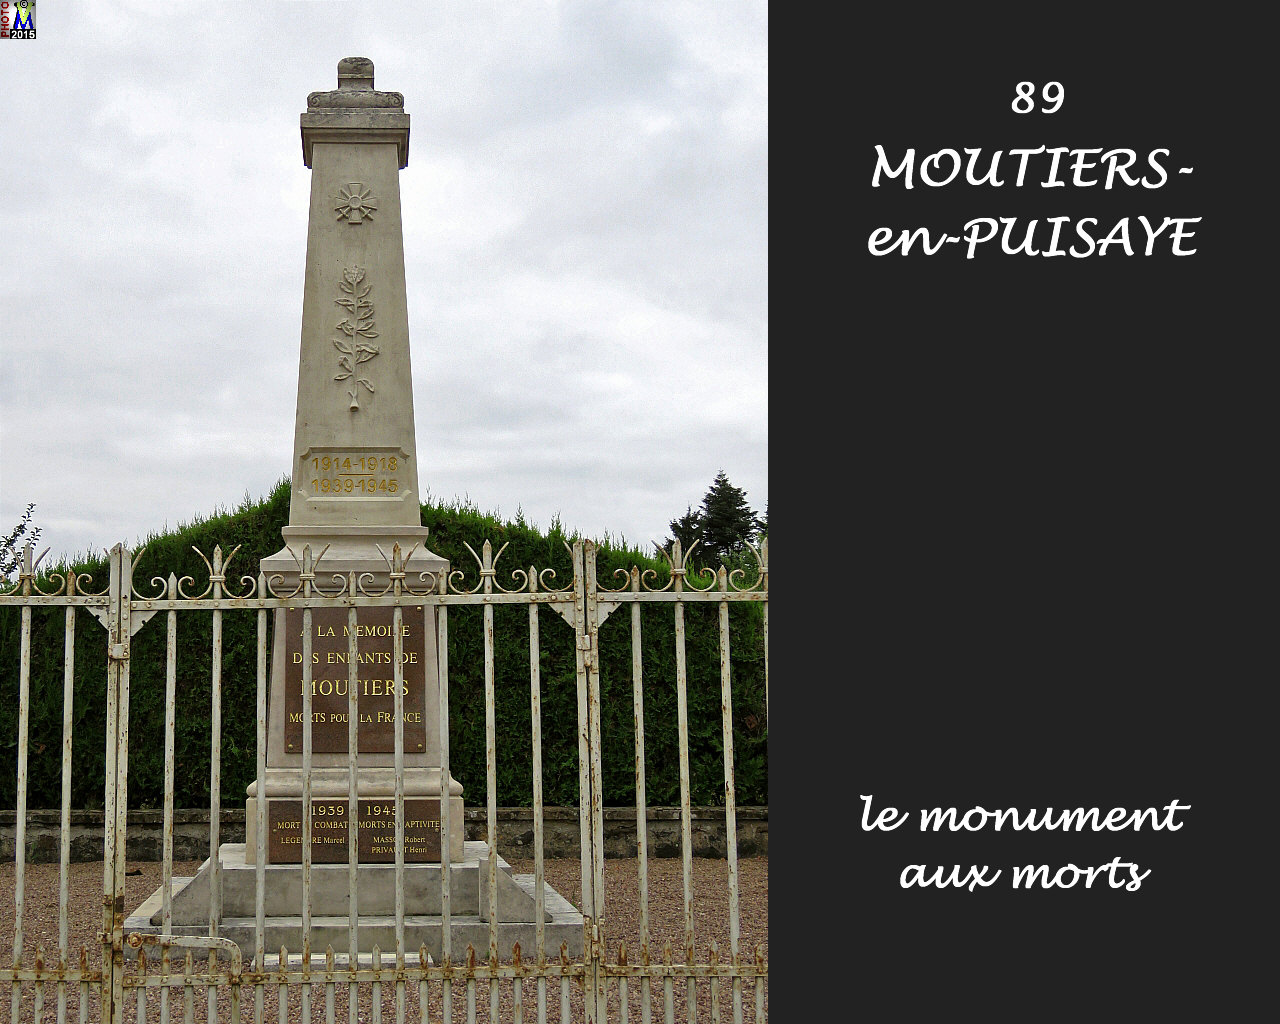 89MOUTIERS-PUISAYE_morts_100.jpg